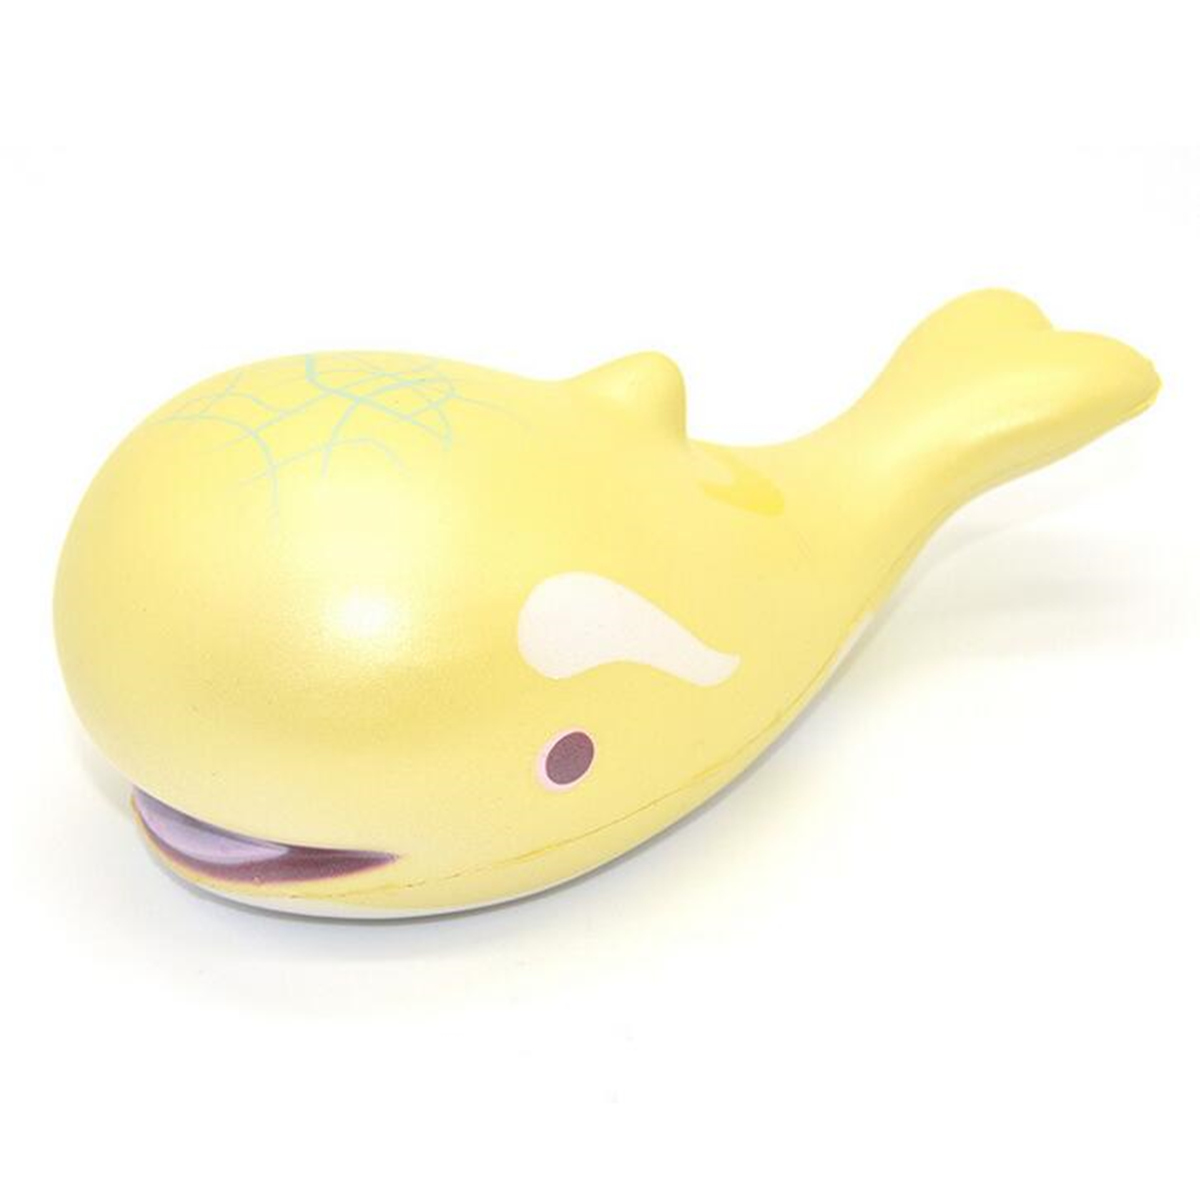 15cm-Whale-Squishy-Slow-Rising-Pressure-Release-Soft-Toy-With-Keychains-for-Iphone-Samsung-Xiaomi-1145805